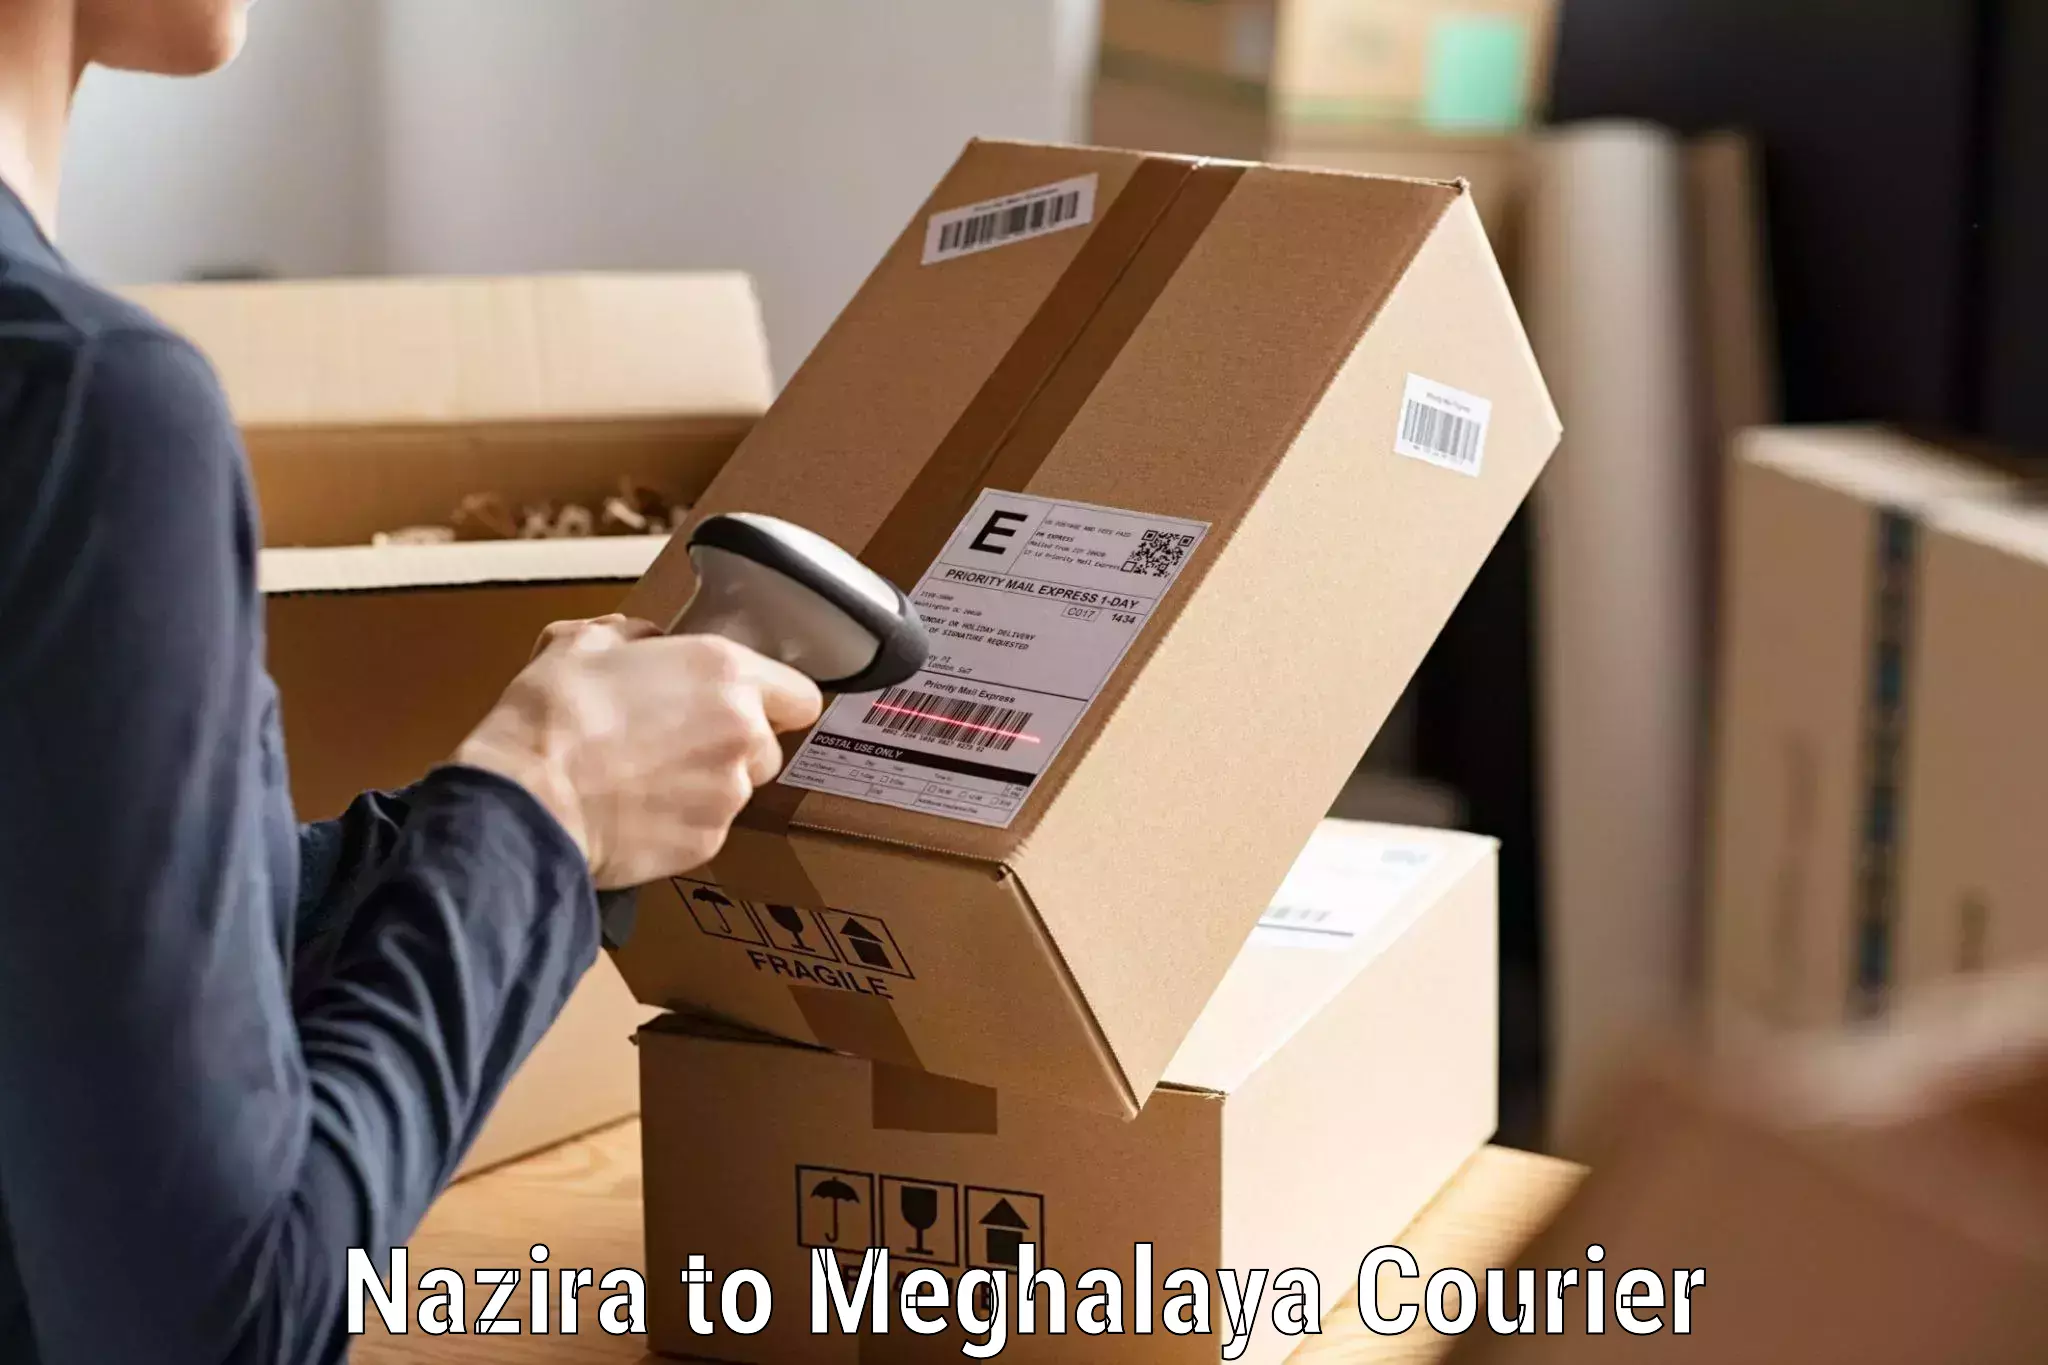 Professional parcel services Nazira to Shillong